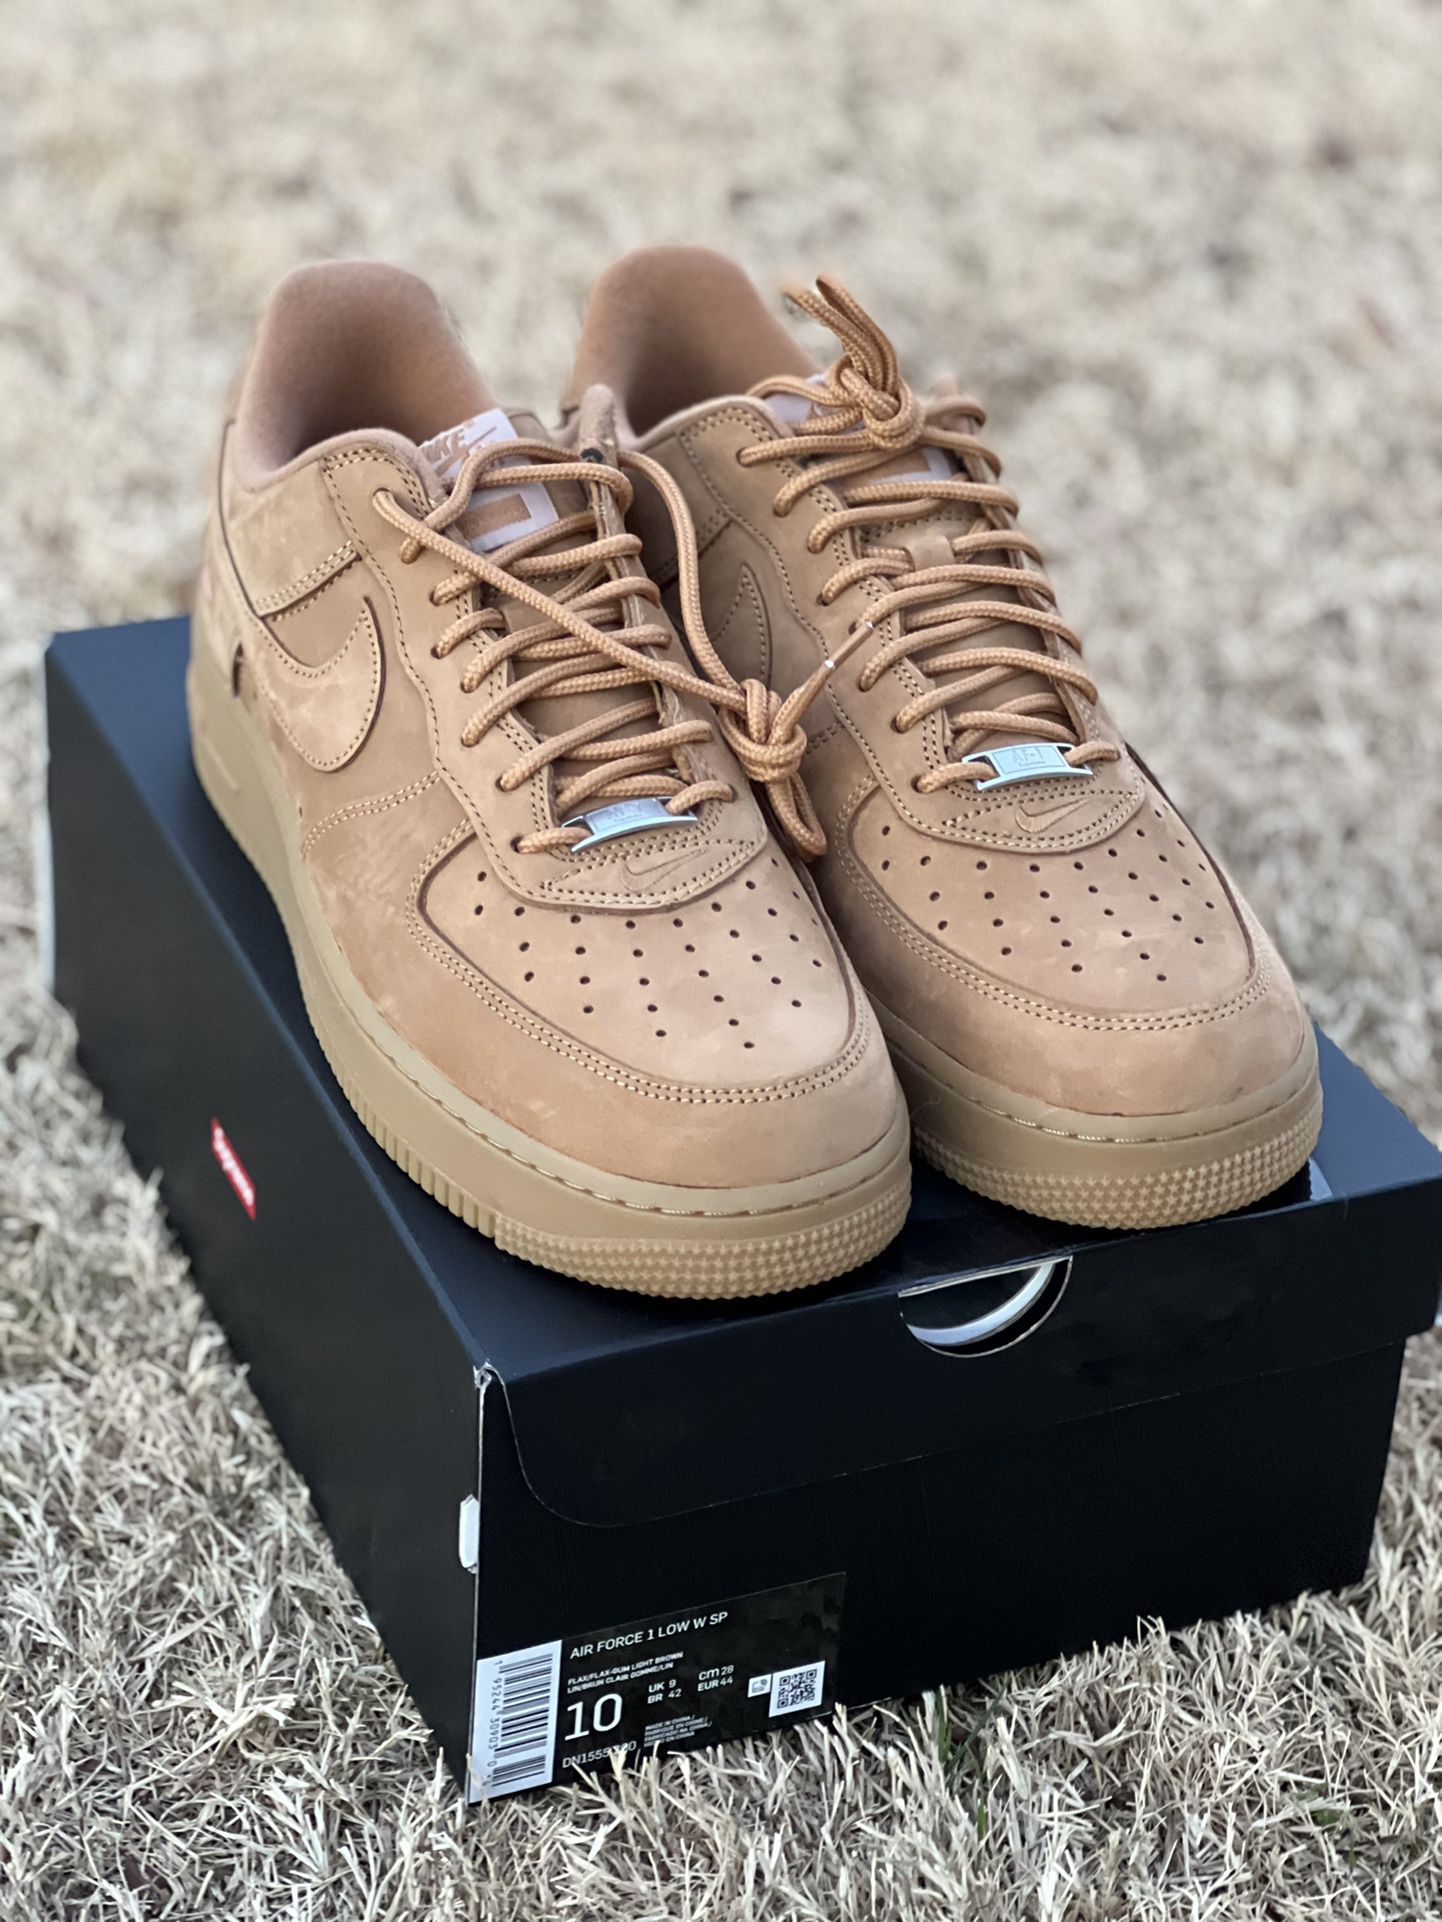 New Air Force 1 Low Supreme 